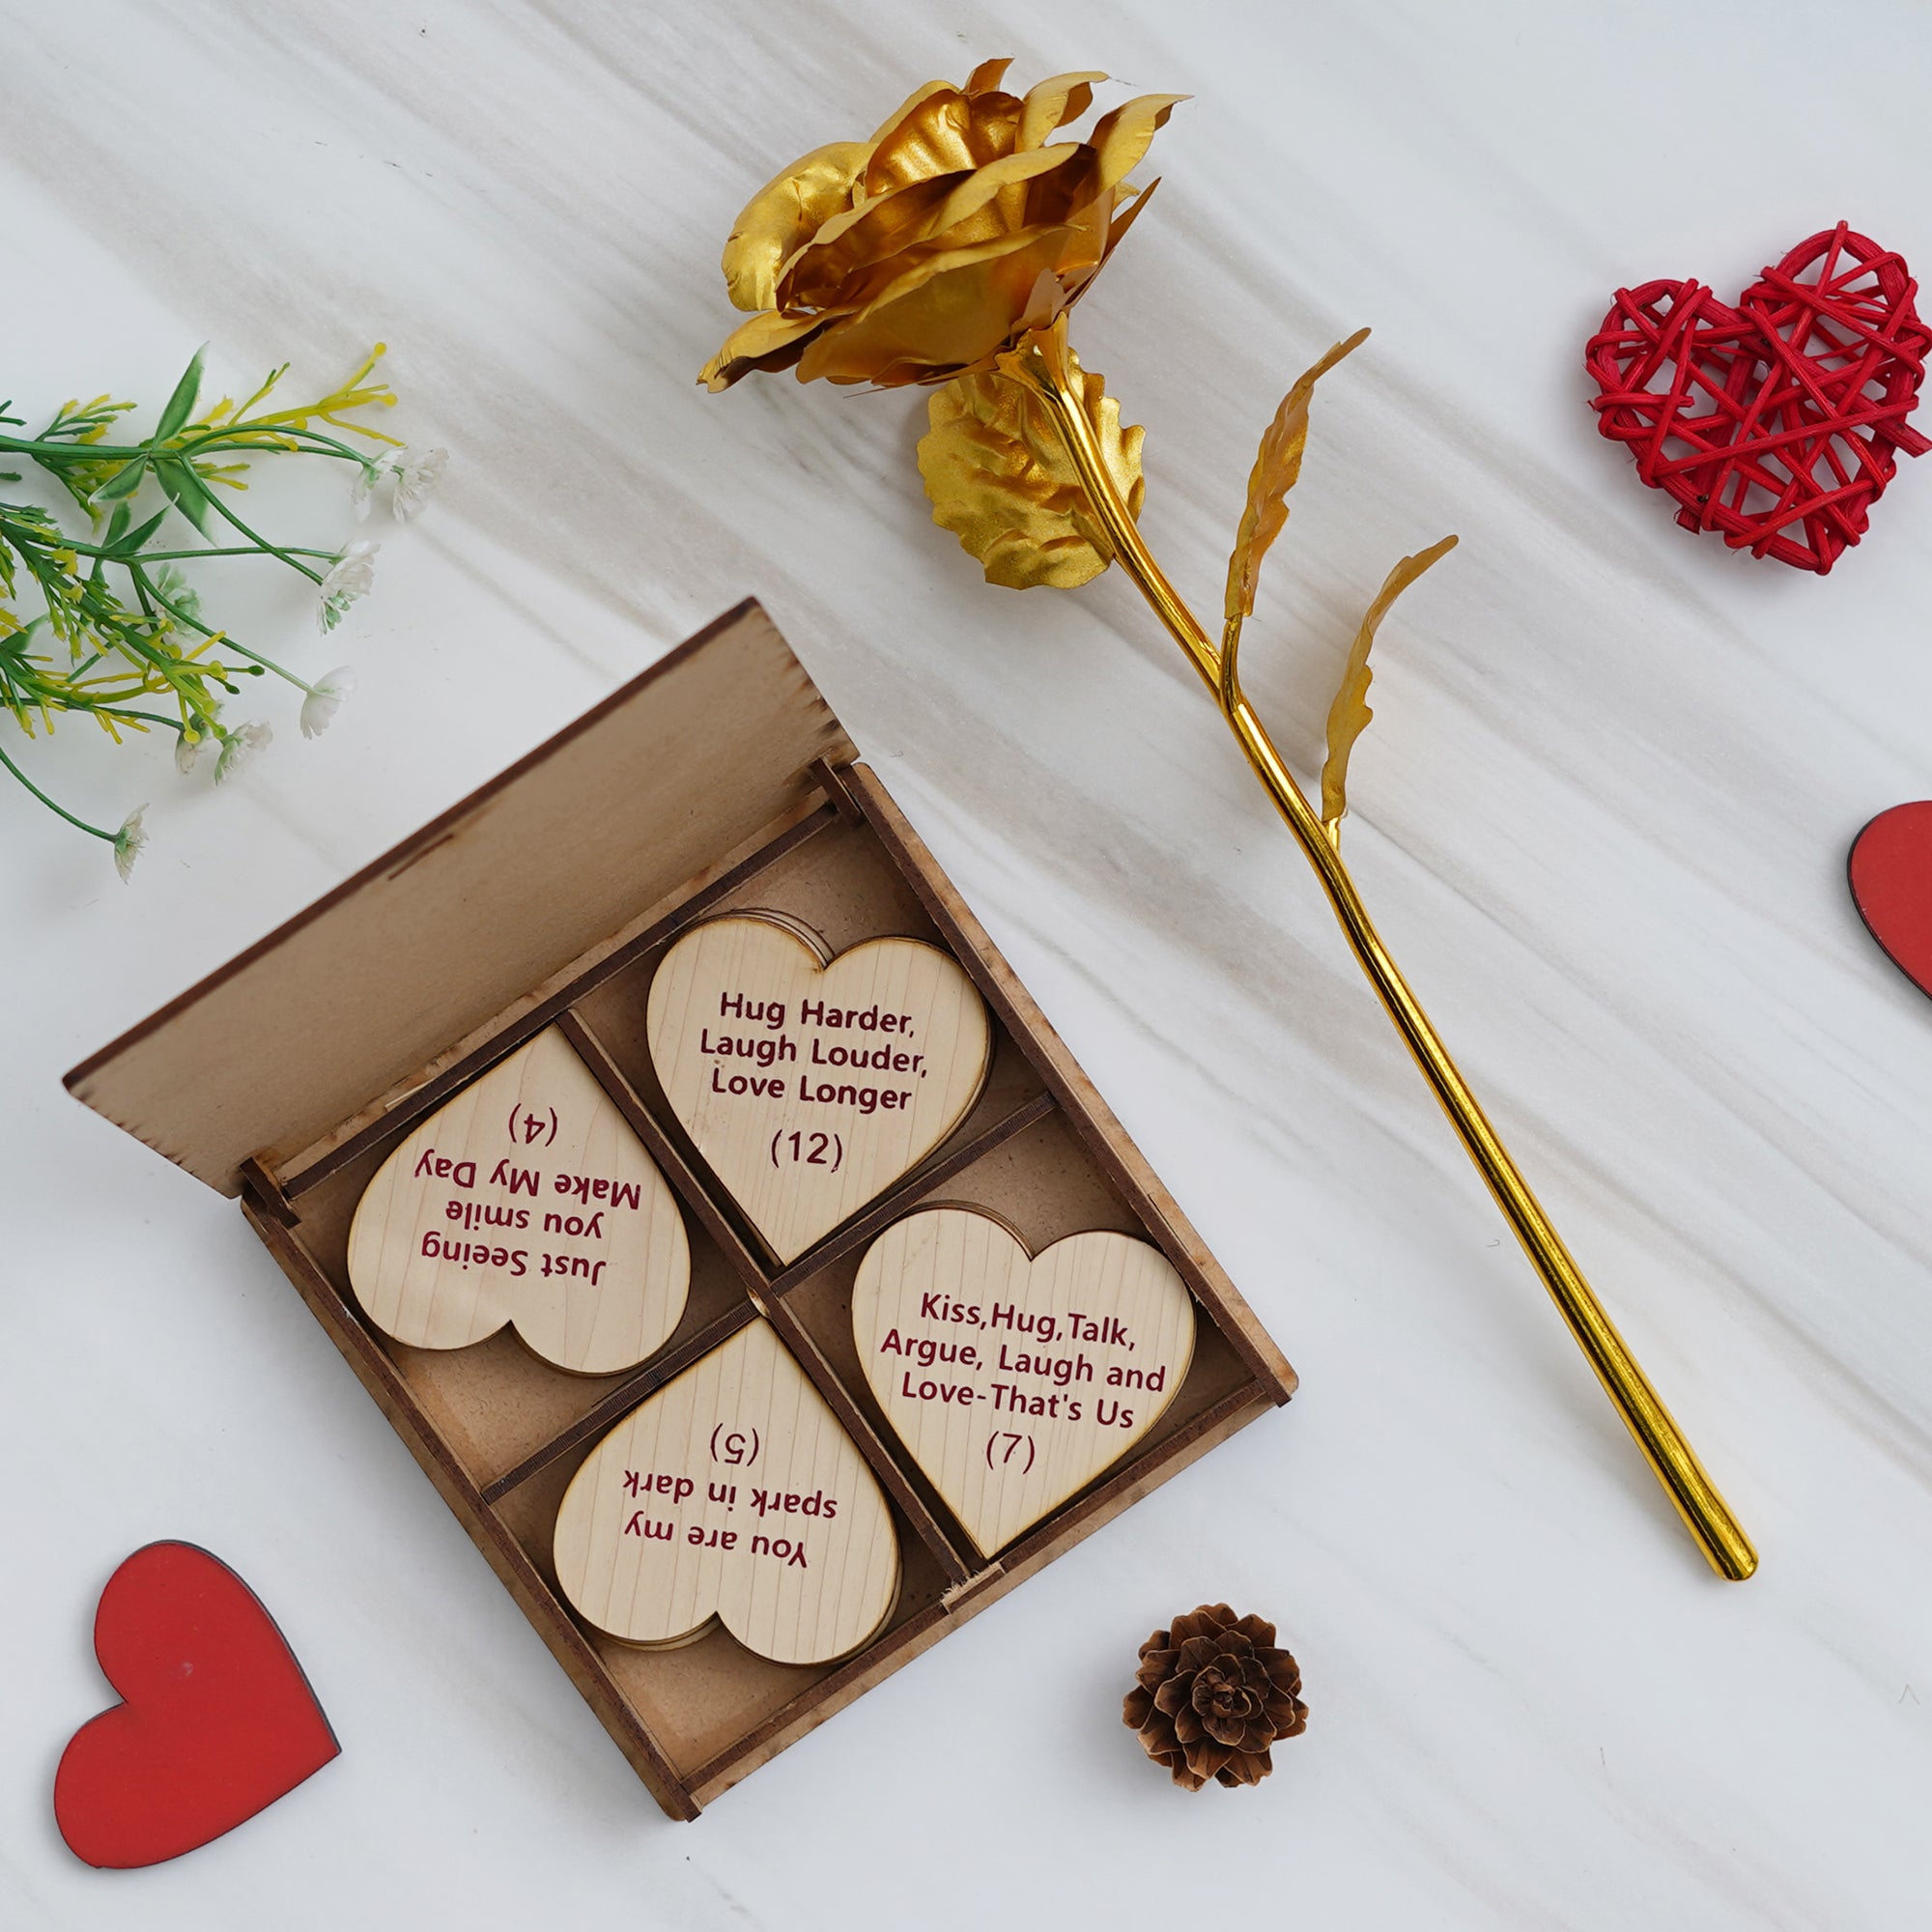 Valentine Combo of Golden Rose Gift Set, "20 Reasons Why I Love You" Printed on Little Hearts Wooden Gift Set